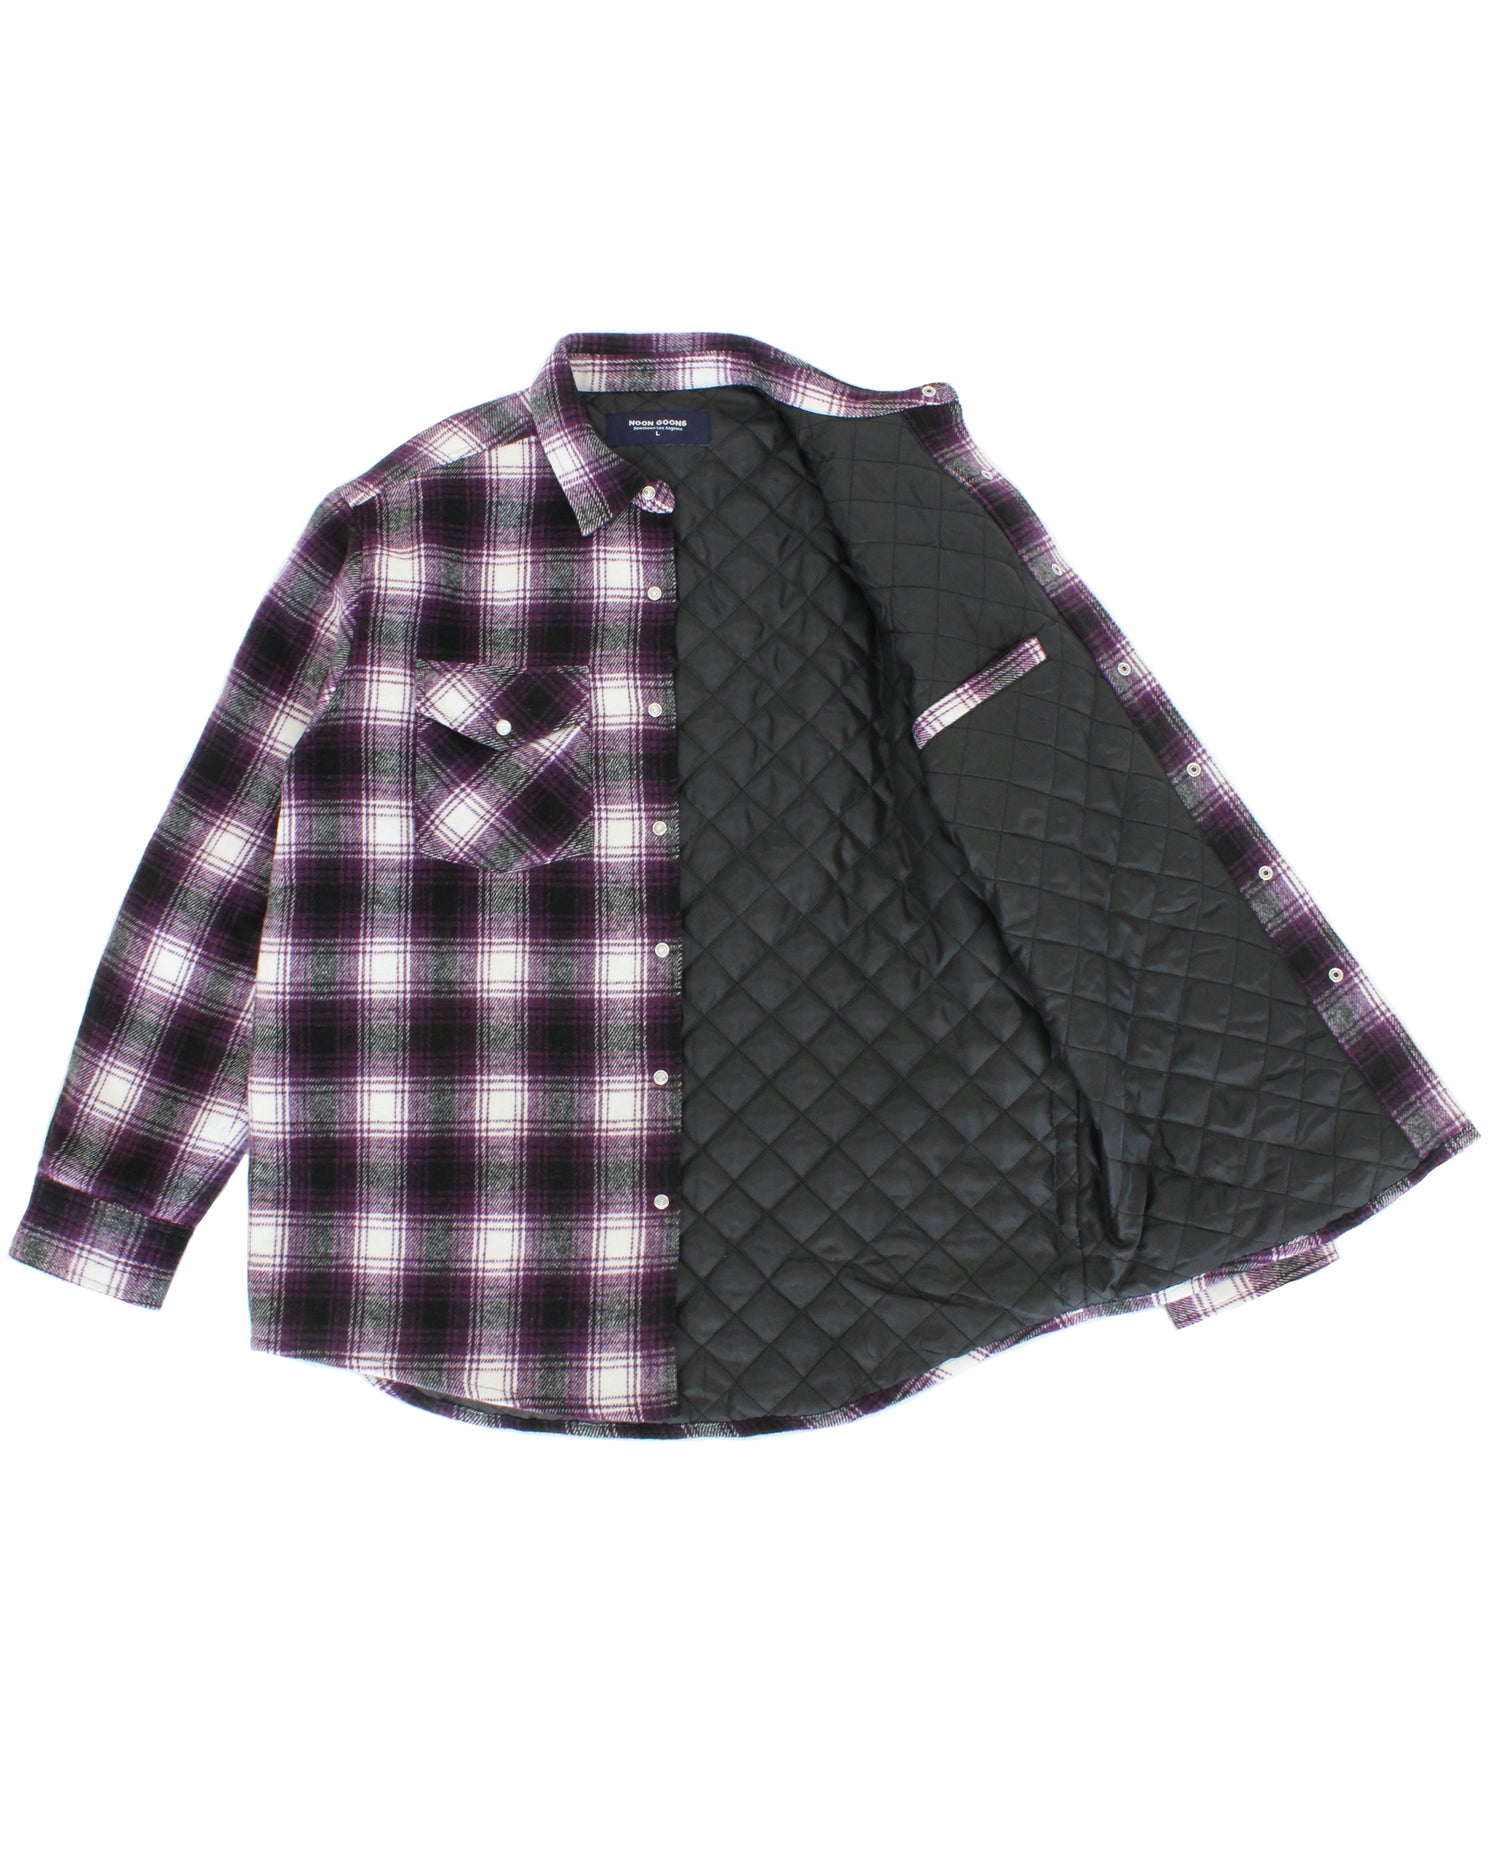 TAHOE QUILTED FLANNEL - PURPLE